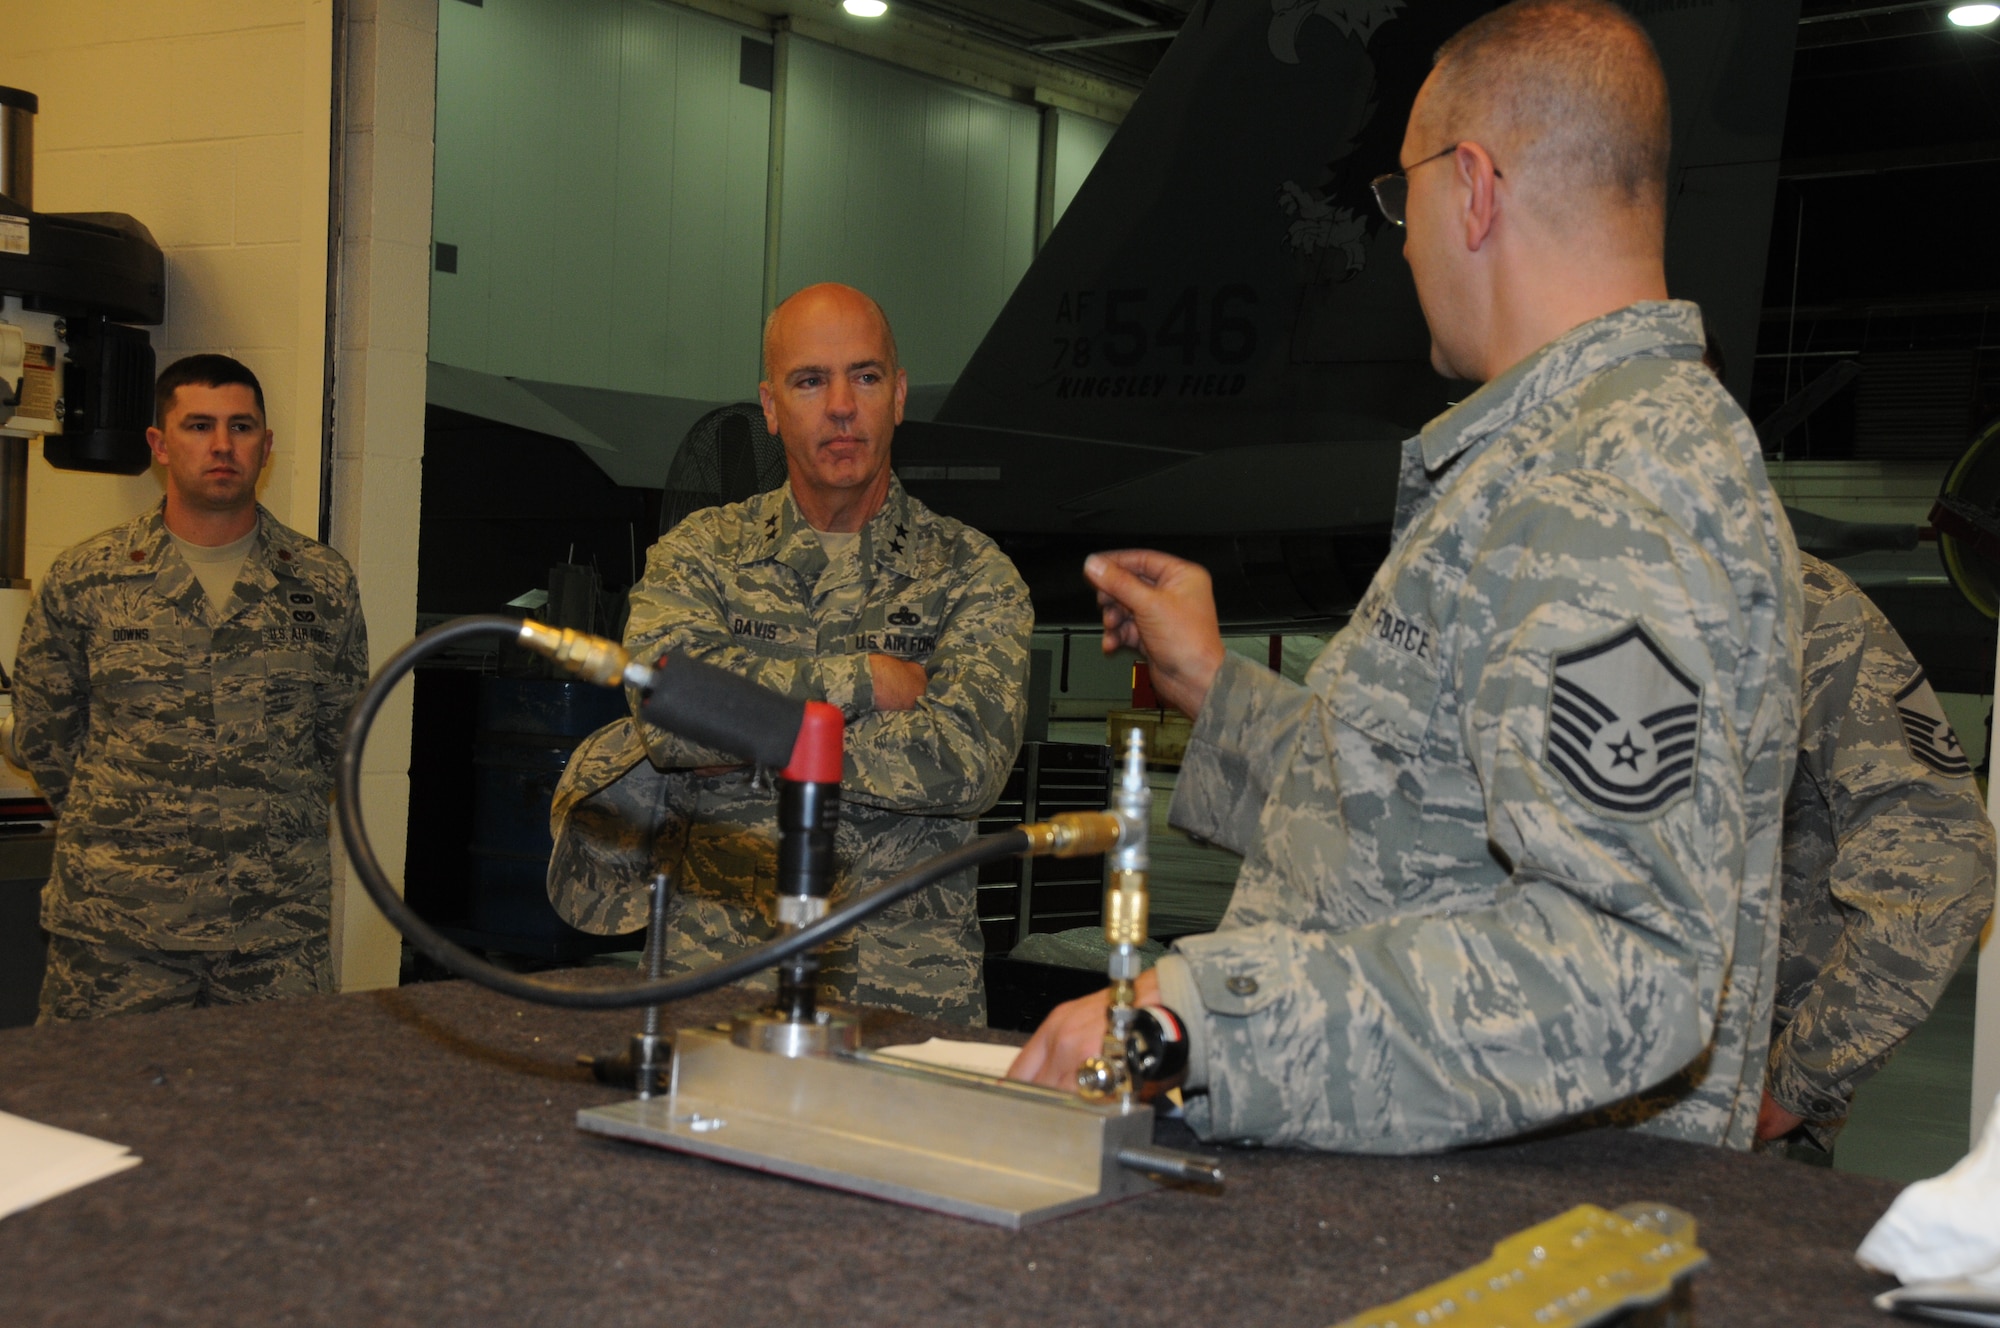 U.S. Air Force Master Sgt. David Chinander, 173rd Maintenance Group, explains to Maj. Gen. T. Glenn Davis, the mobilization assistant to the commander, Air Force Life Cycle
Management Center, how a tool designed and fabricated locally in the 173rd Sheet Metal shop helps save lost sorties, manpower and perhaps millions of dollars. Without this fixture an aircraft has to go to depot maintenance in Georgia incurring those costs and removing it from the fleet until it returns. (U.S. Air National Guard photo by Master Sgt. Jennifer Shirar)